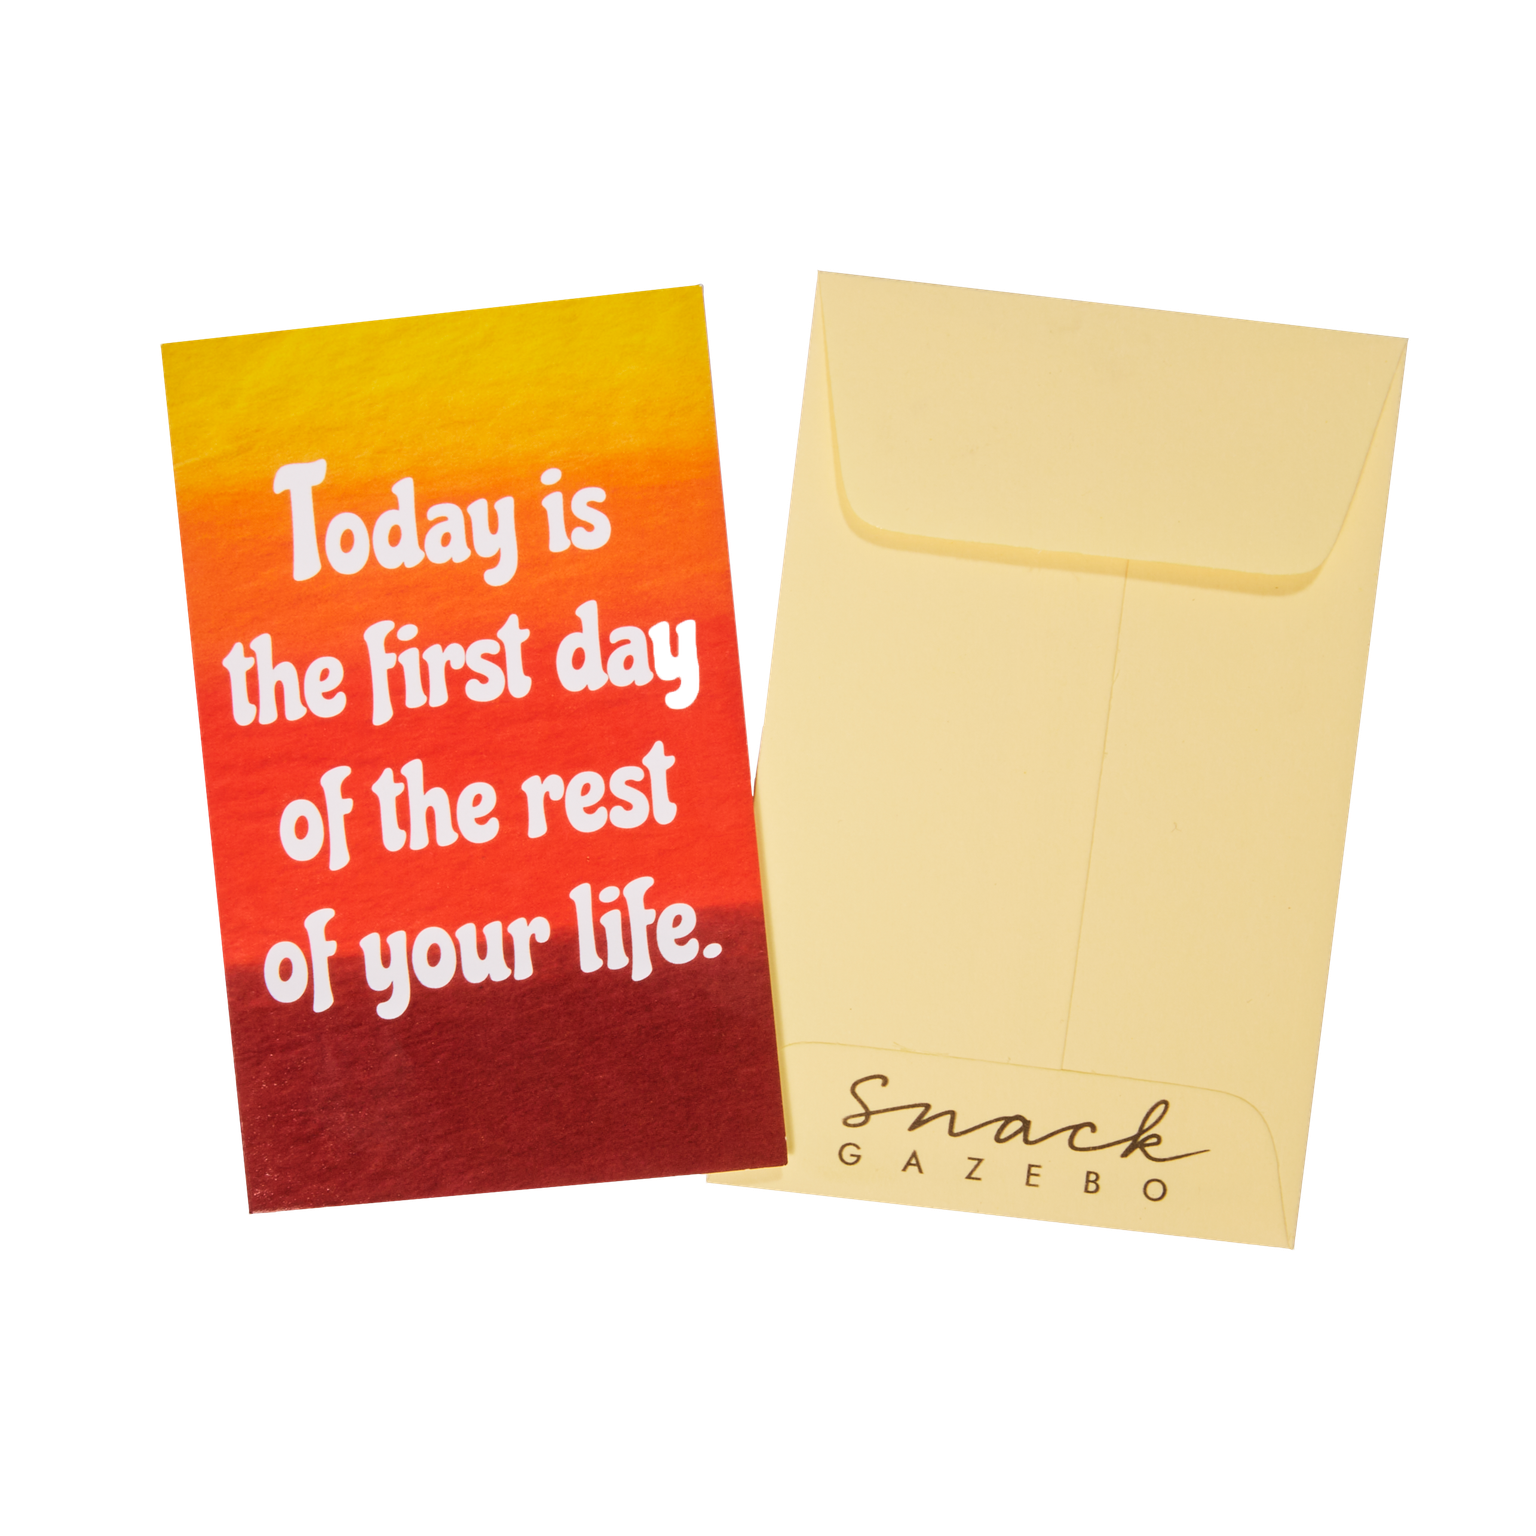 &quot;Today is the first day of the rest of your life&quot; Snack Gazebo Card + Envelope